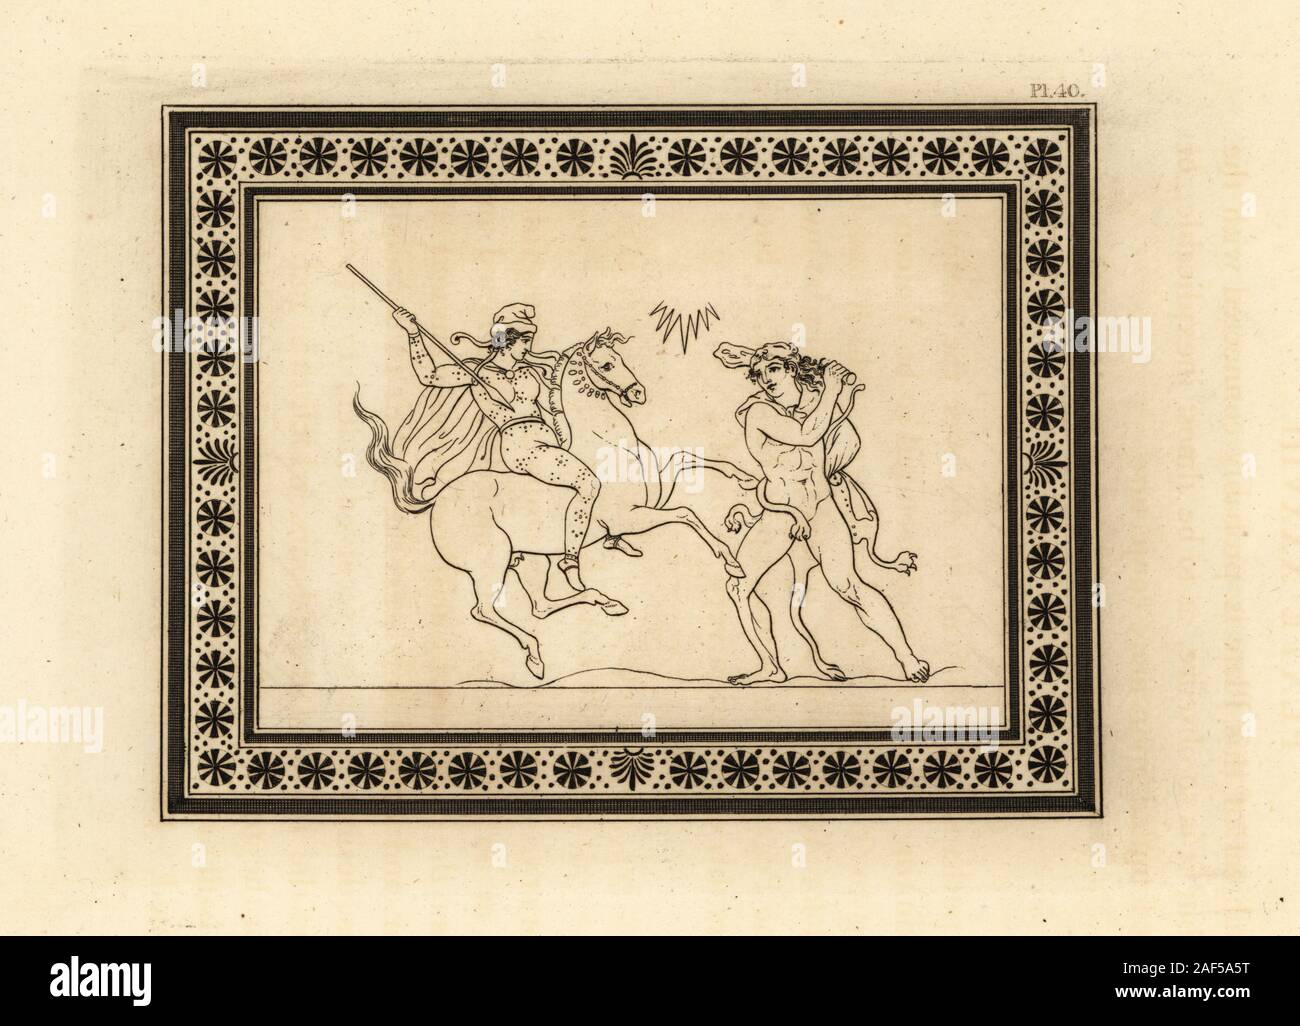 Hercules, wearing the Nemean lionskin and holding a club, battling Hippolyta, Queen of the Amazons, for the girdle of Mars. Copperplate engraving by Thomas Kirk (1765-1797)  from Sir William Hamilton’s Outlines from the Figures and Compositions upon the Greek, Roman and Etruscan Vases of the Late Sir Hamilton, T. M’Lean, London, 1834. Stock Photo